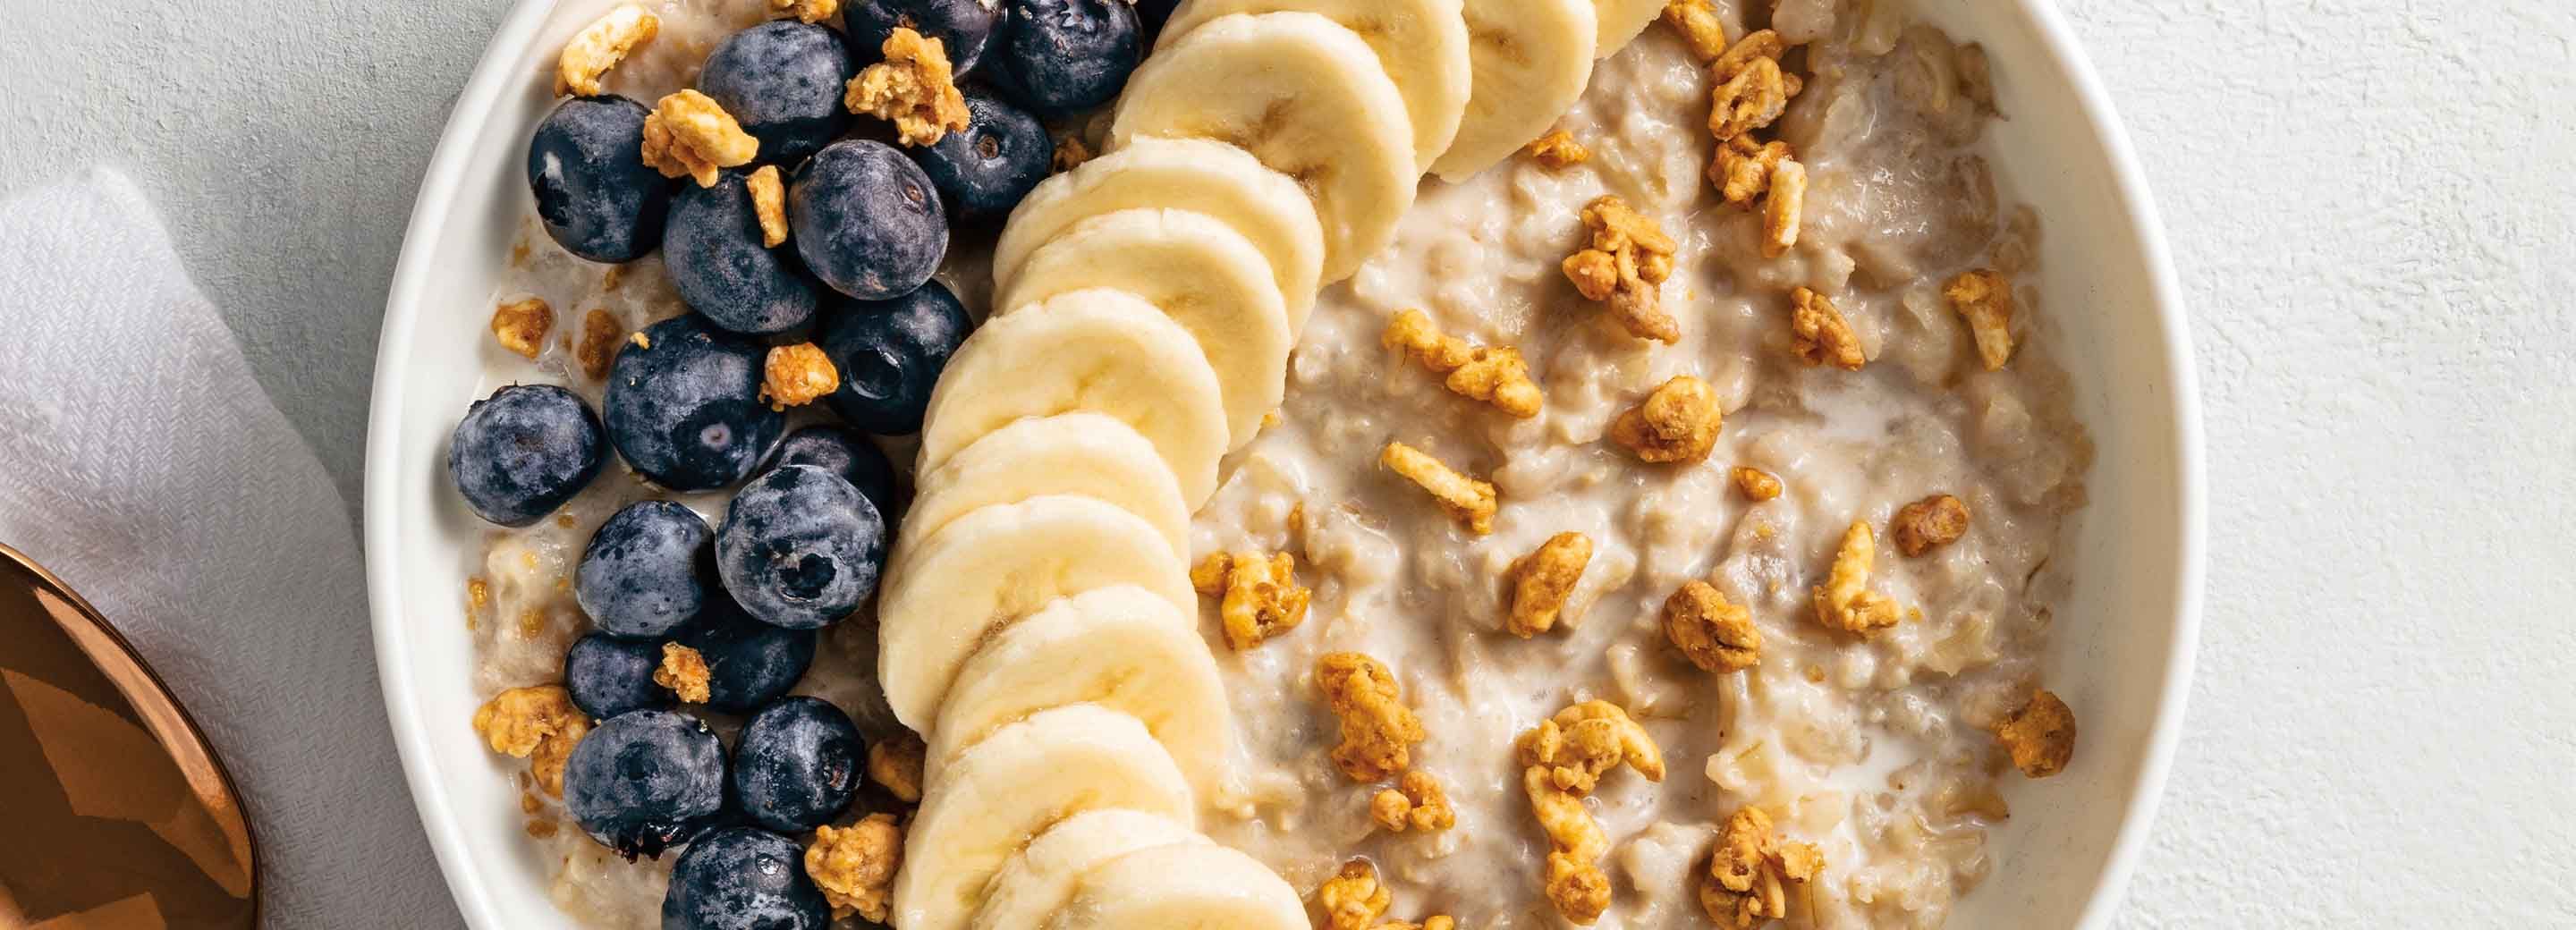 Brown Rice Breakfast Pudding Bowl